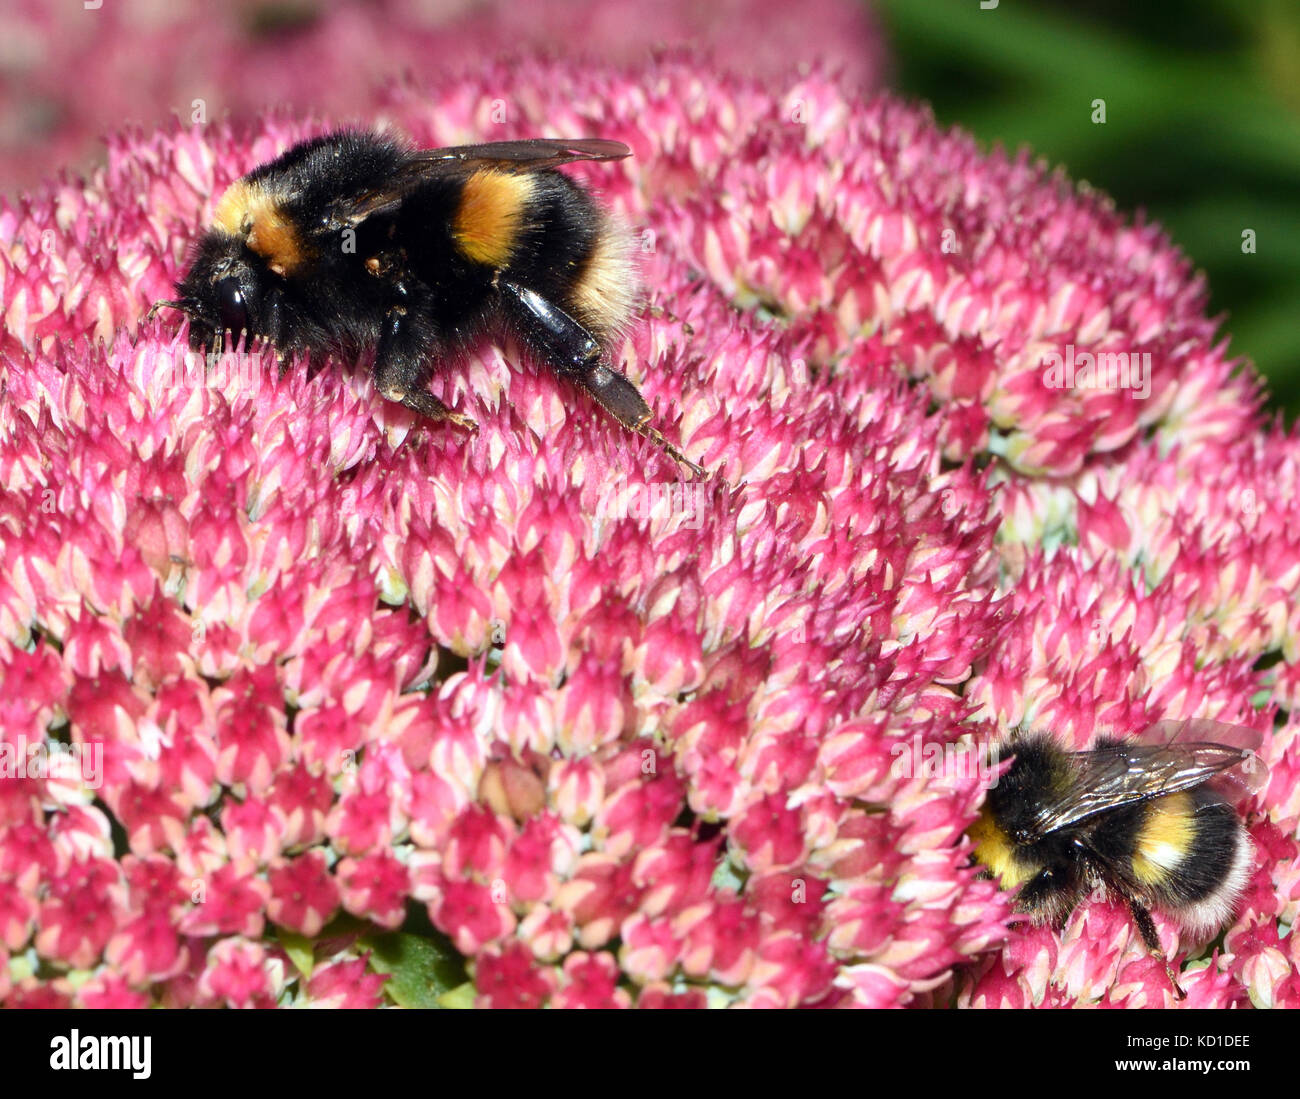 A worker  and a queen Buff-tailed Bumblebee  (Bombus terrestris) on a Sedum spectable flower head. The queen is the larger bee and the size difference Stock Photo